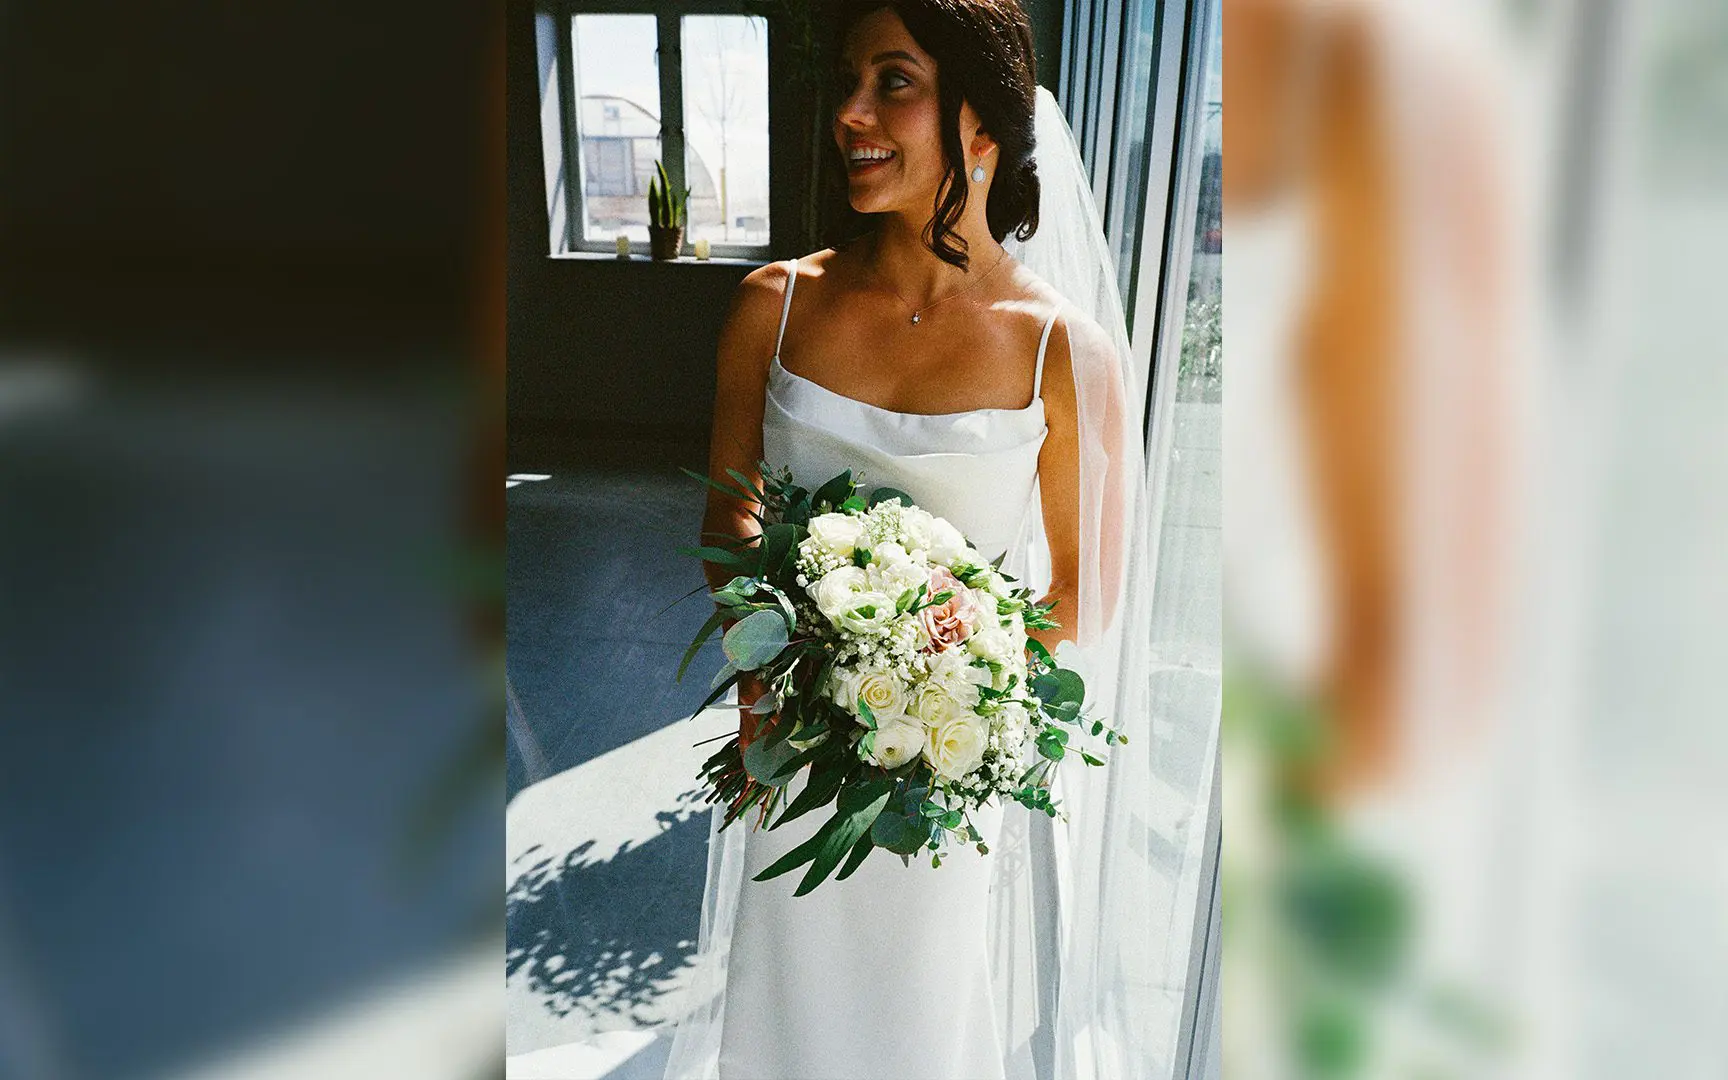 A bride in a white dress smiling and holding a bouquet of white flowers, standing indoors with natural light streaming in.